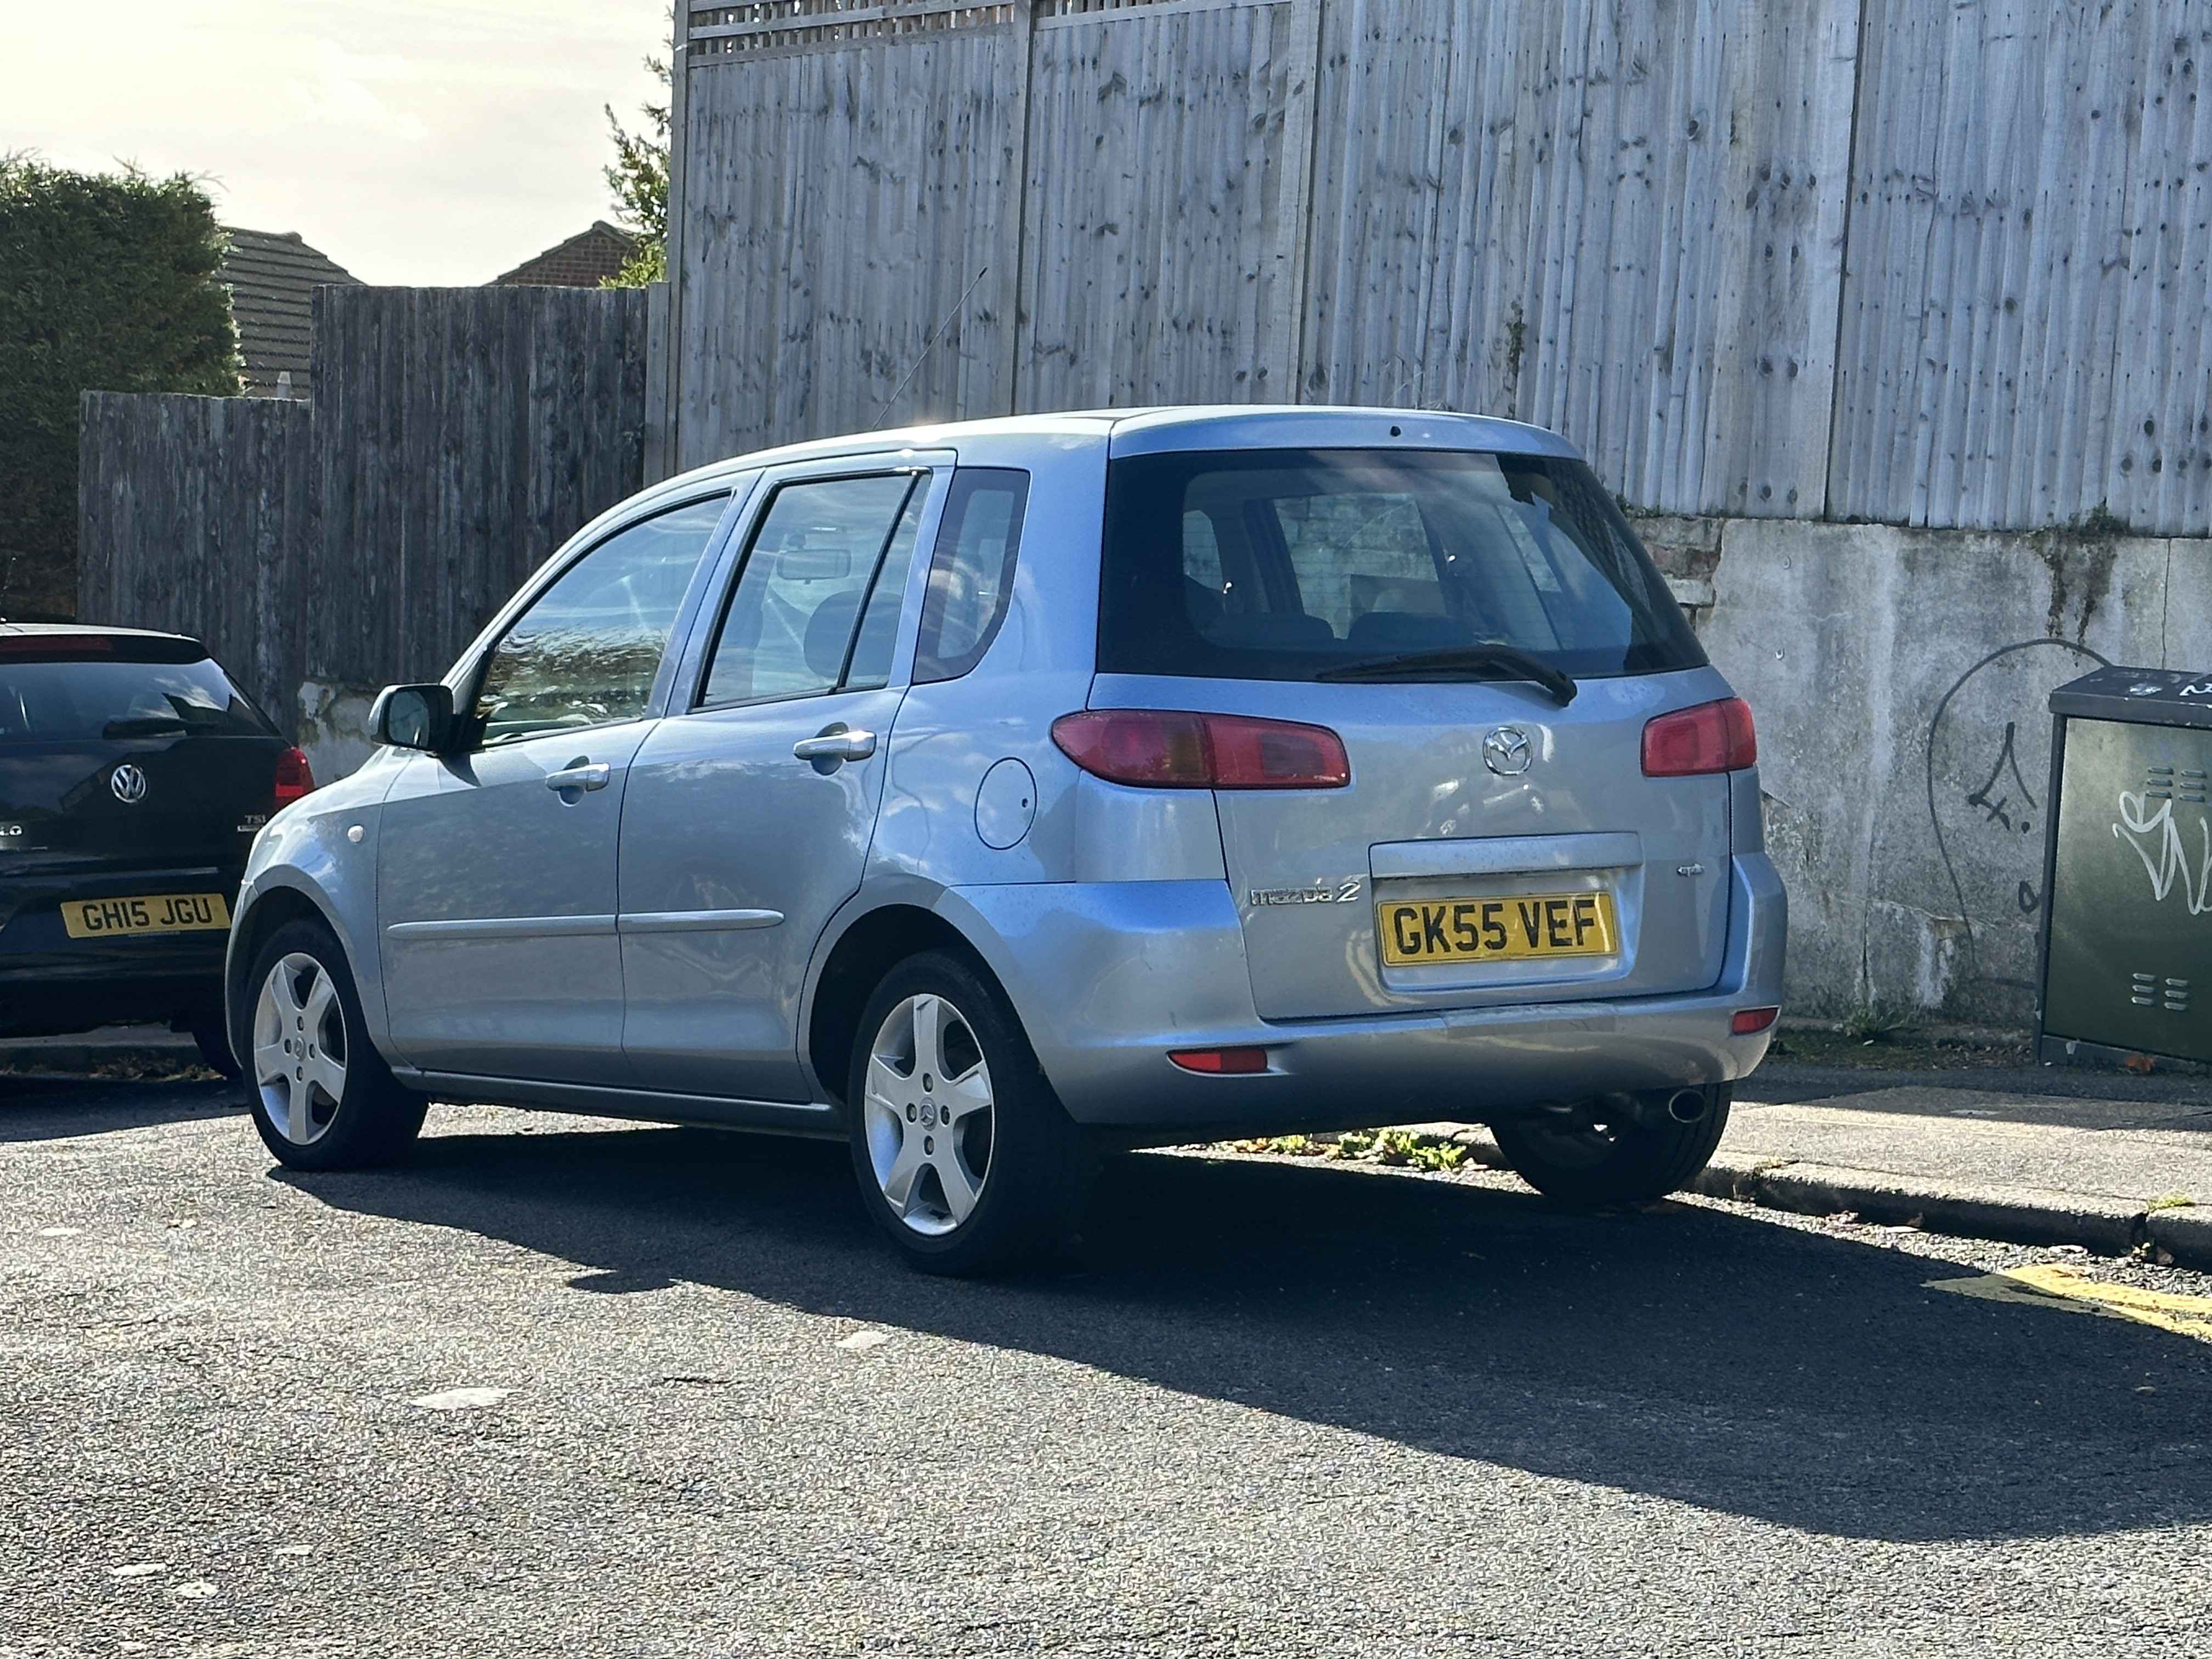 Photograph of GK55 VEF - a Silver Mazda 2 parked in Hollingdean by a non-resident. The second of nine photographs supplied by the residents of Hollingdean.